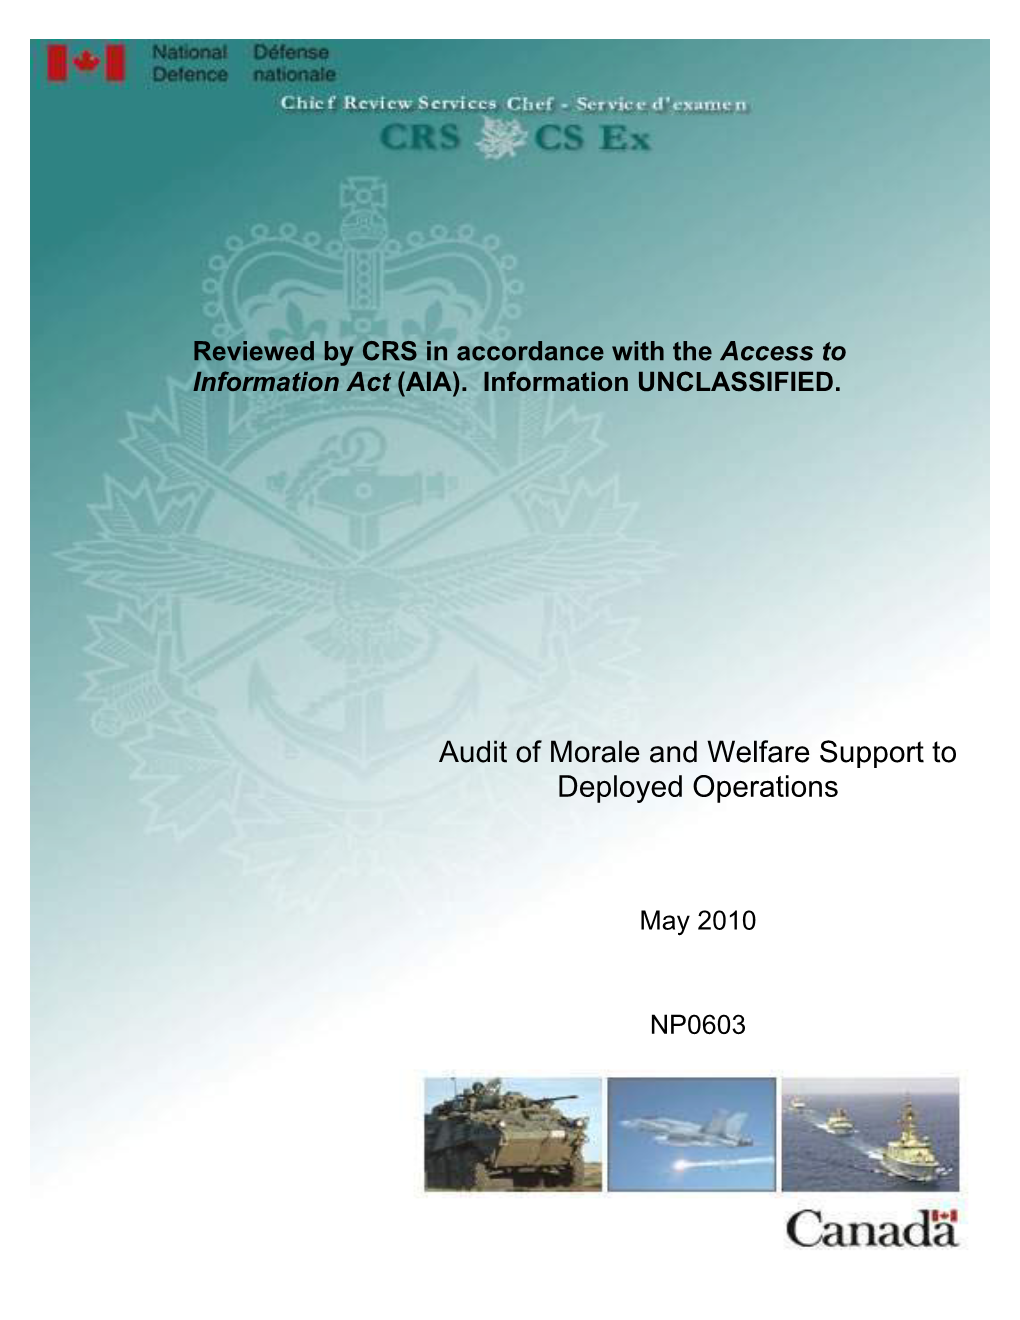 Audit of Morale and Welfare Support to Deployed Operations Final – May 2010